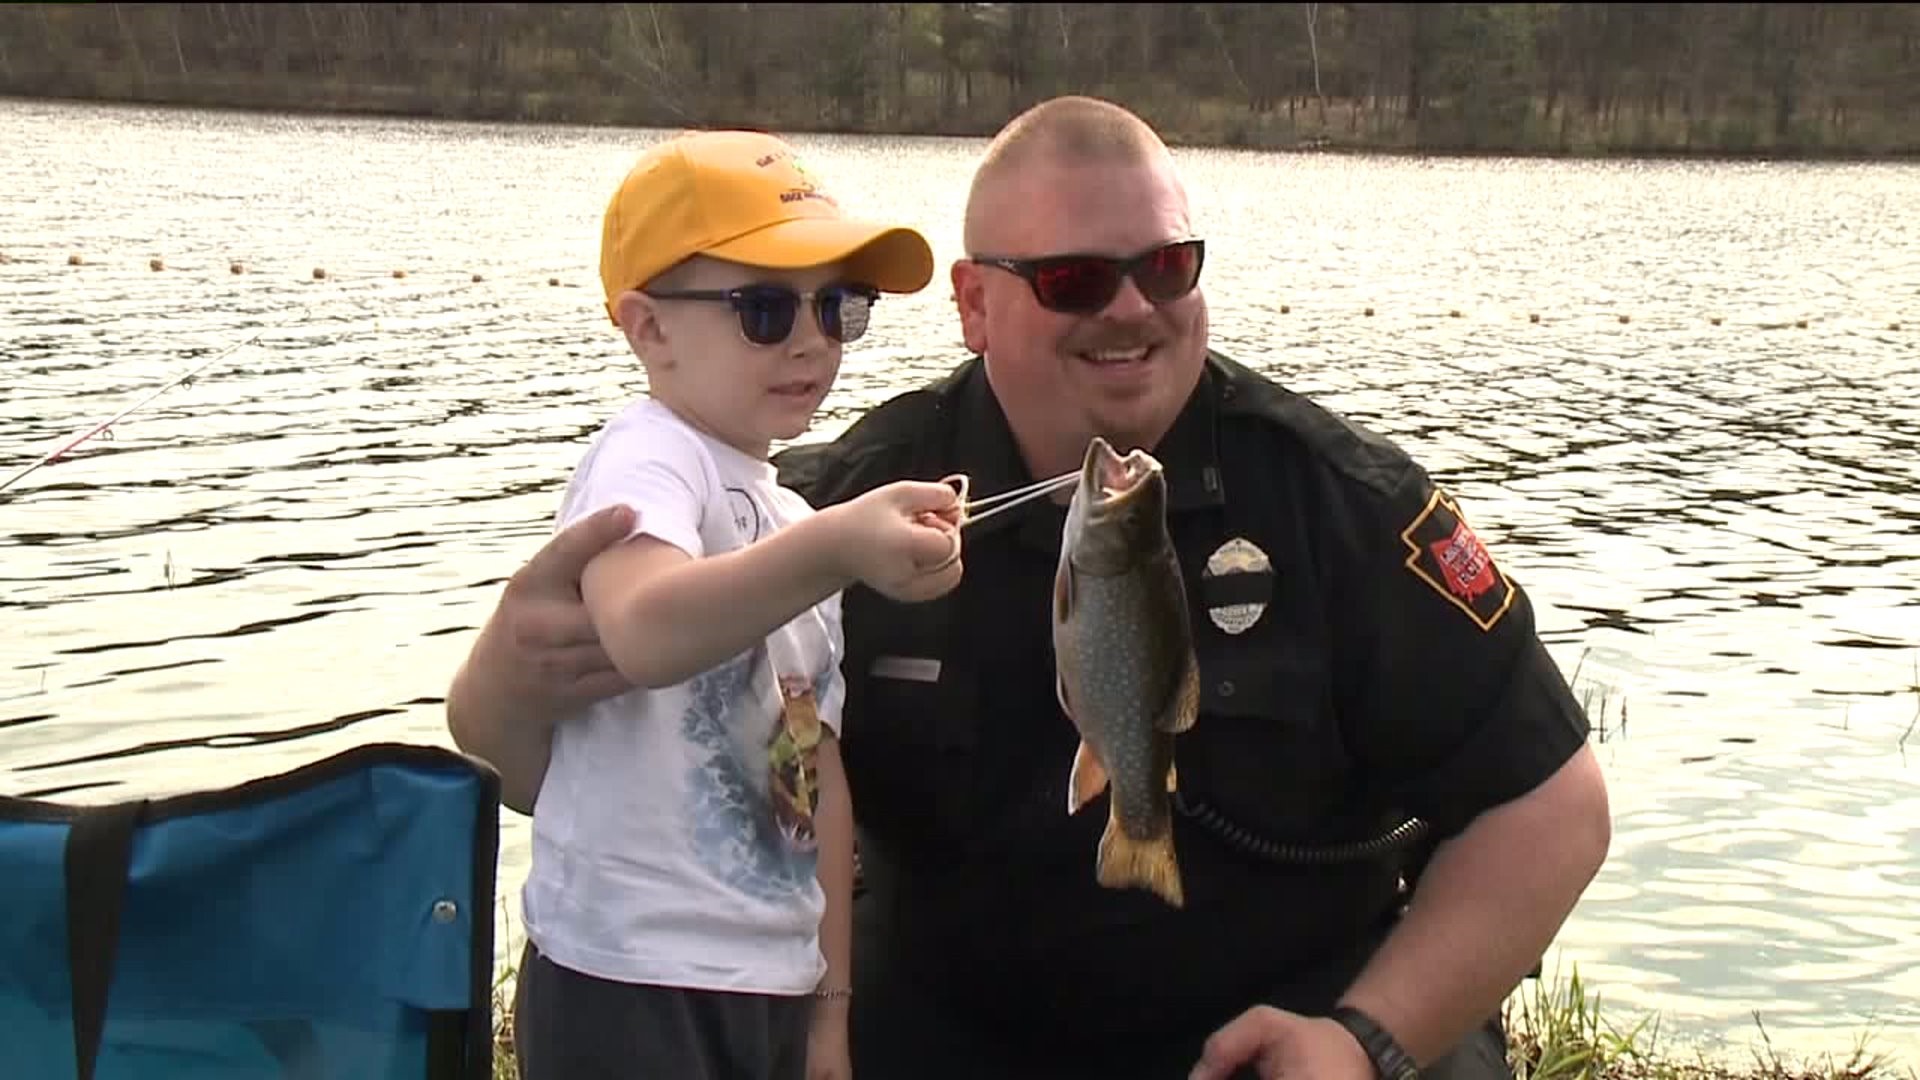 Police Officers Go Fishing with Kids